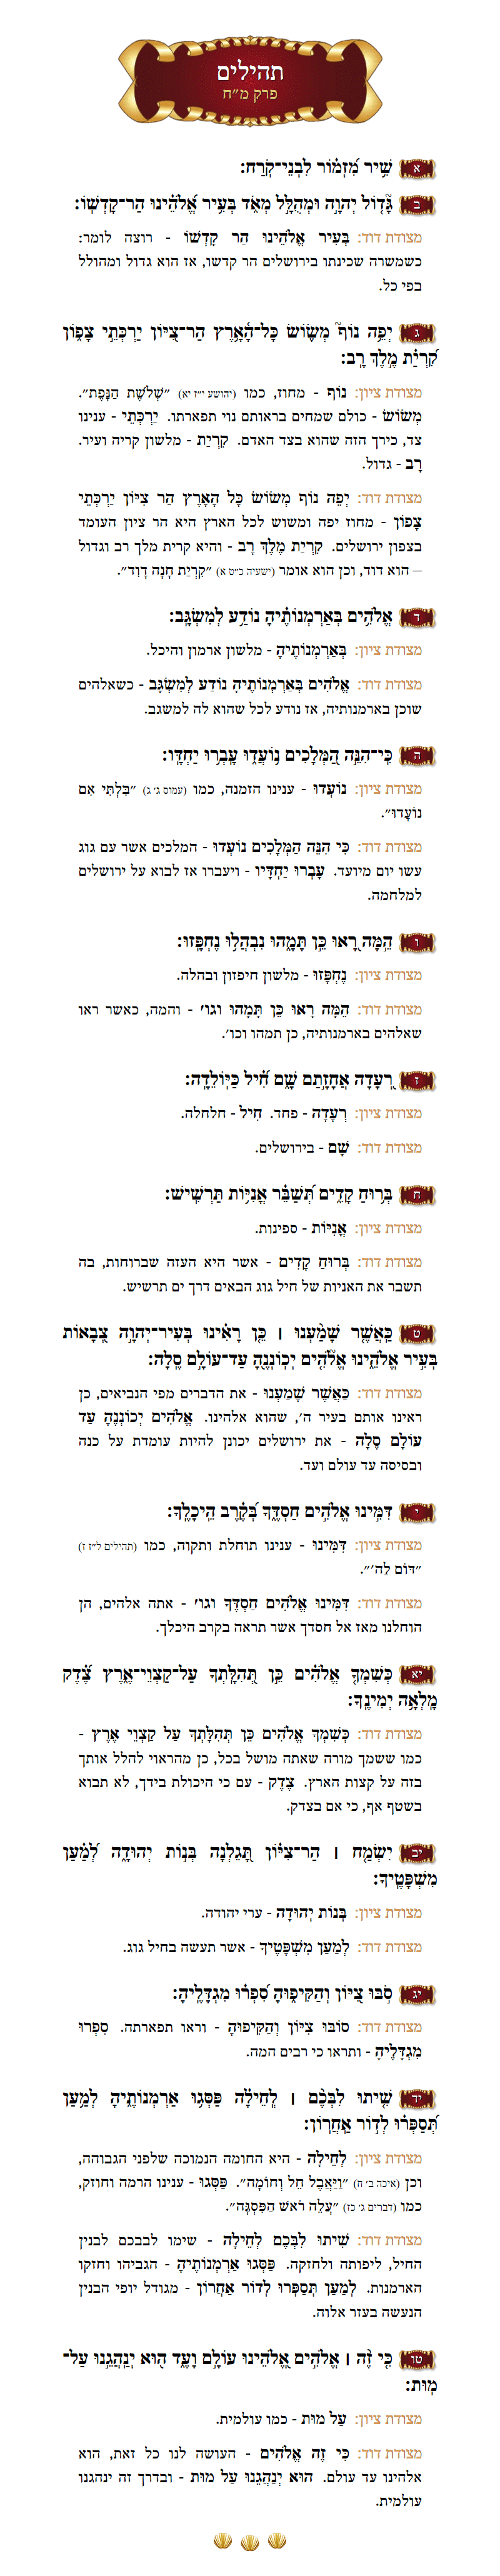 Sefer Tehillim Chapter 48 with commentary